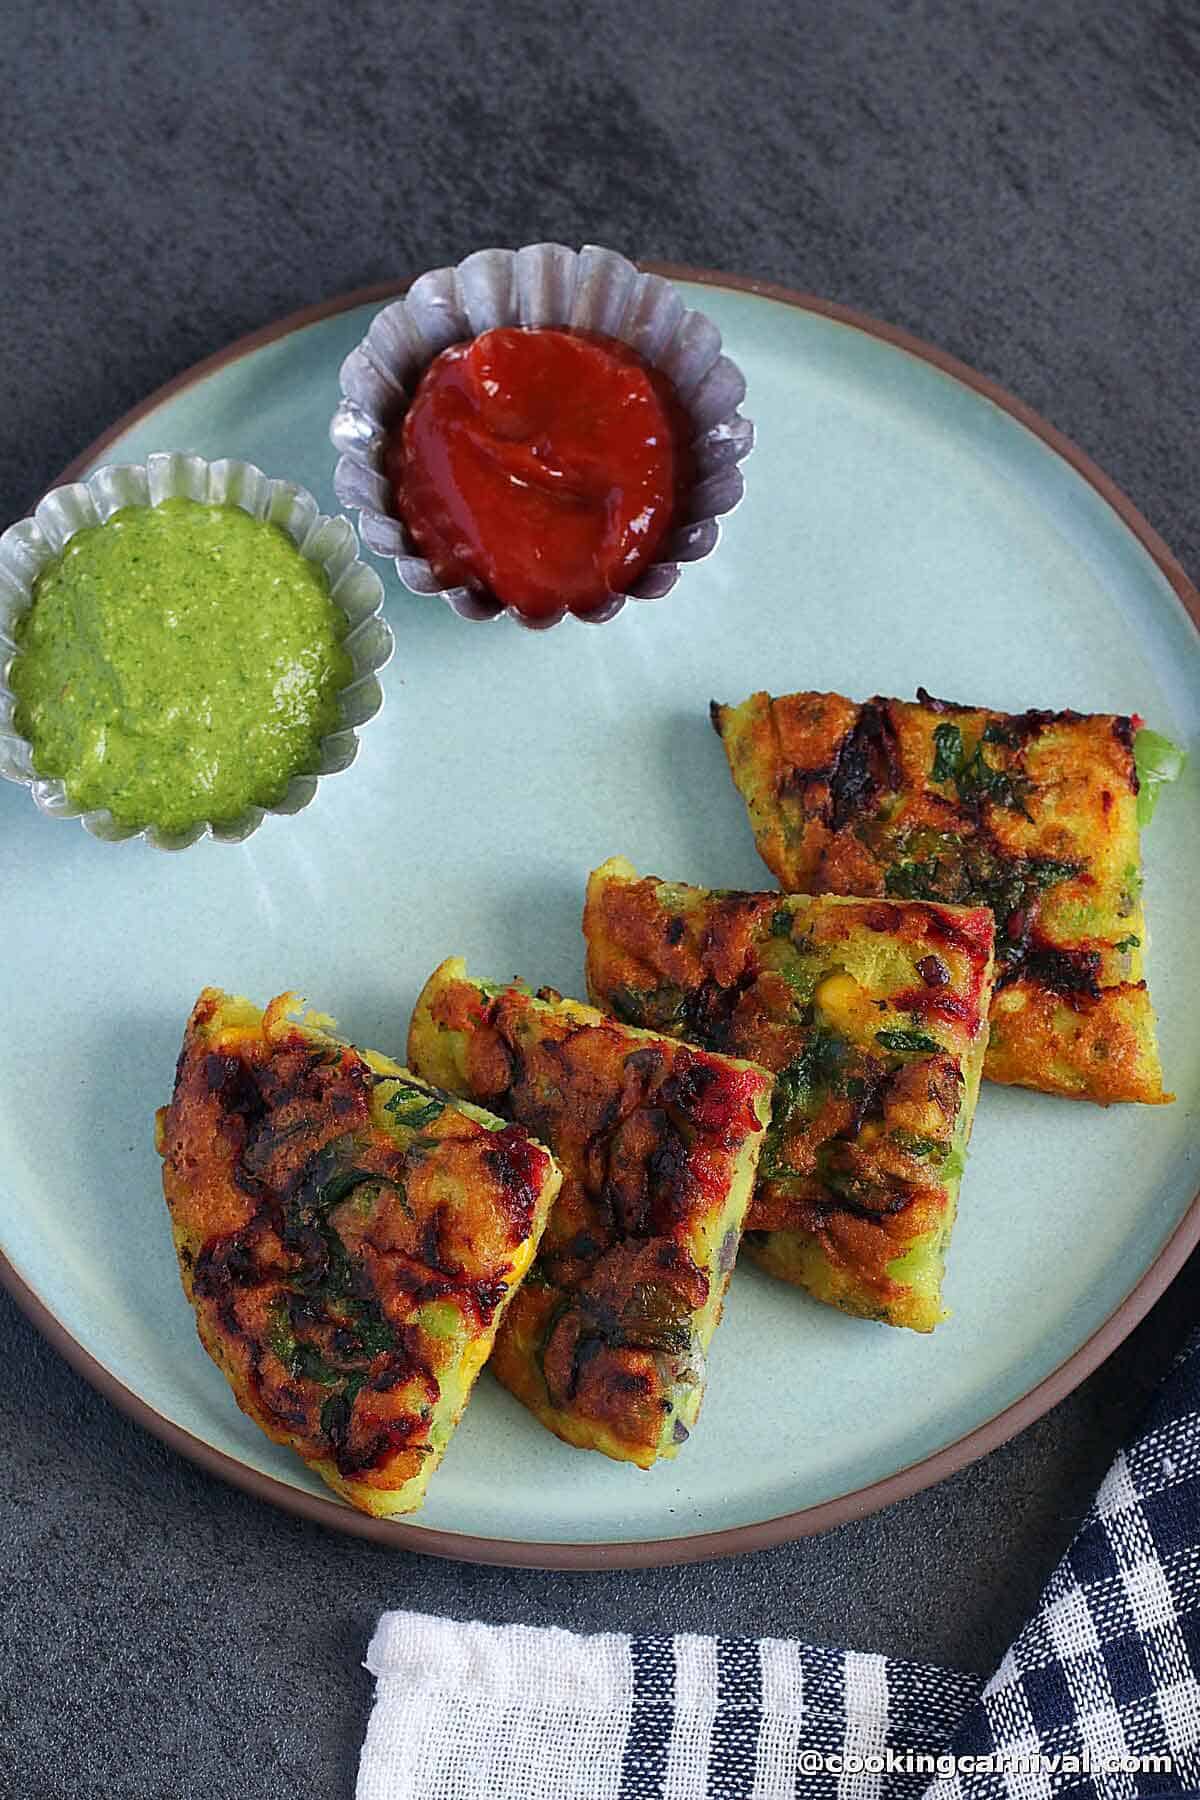 four pieces of moong dal pancake, green chutney and ketchup on a plate.